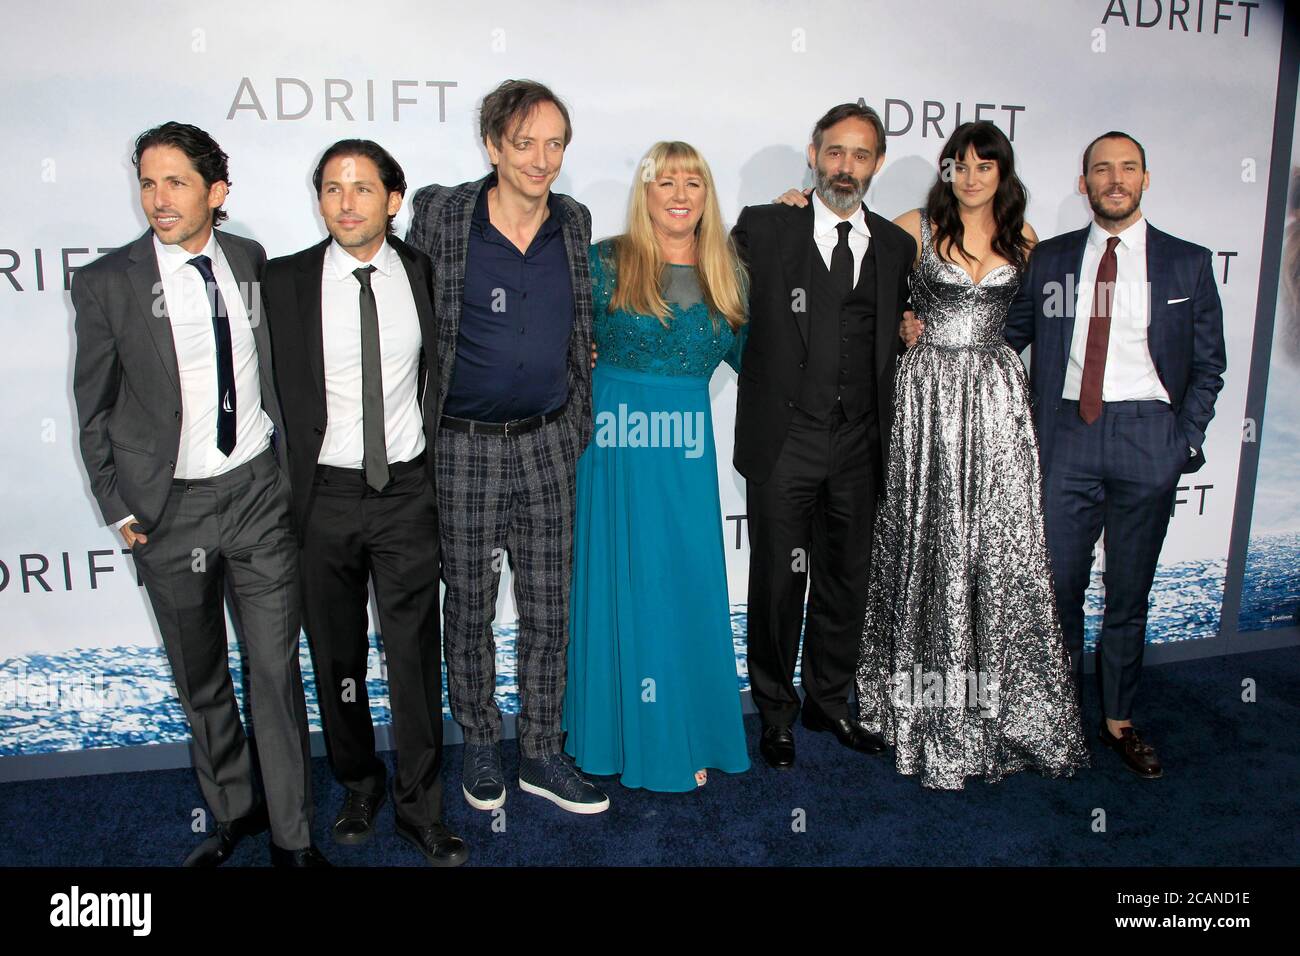 LOS ANGELES - MAY 23:  Aaron Kandell, Co-Writer-Producer, Jordan Kandell, Co-Writer-Producer, Volker Bertelmann, Composer, Tami Oldham Ashcraft, Author, Baltasar Kormakur, Director-Producer, Shailene Woodley, Sam Claflin at the 'Adrift' World Premiere at the Regal LA Live on May 23, 2018 in Los Angeles, CA Stock Photo